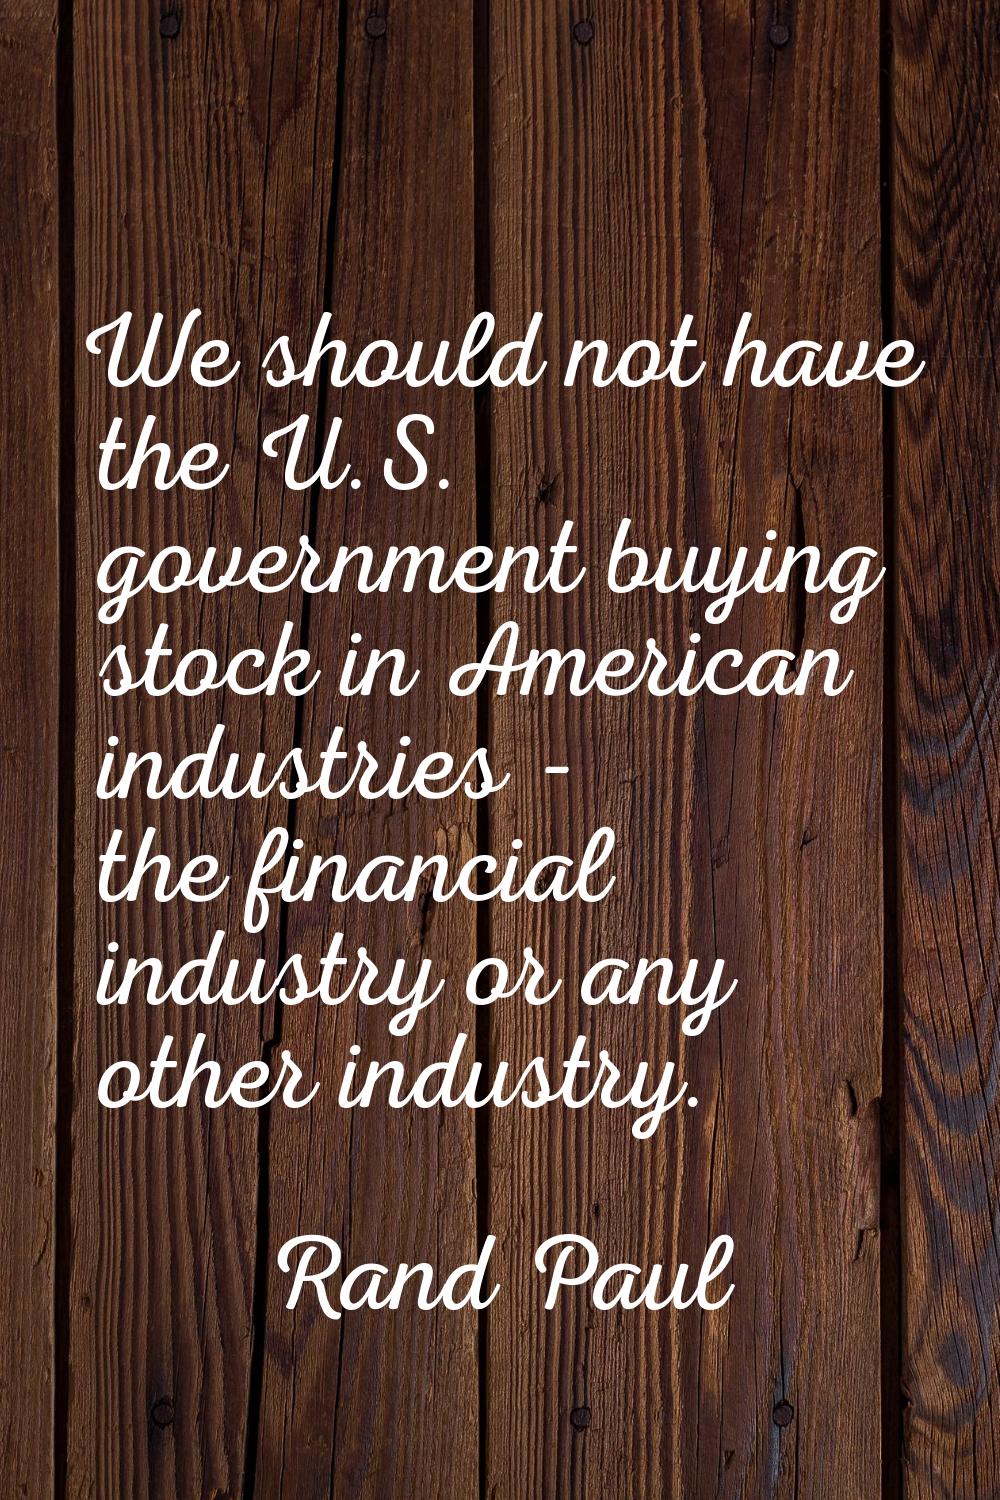 We should not have the U.S. government buying stock in American industries - the financial industry